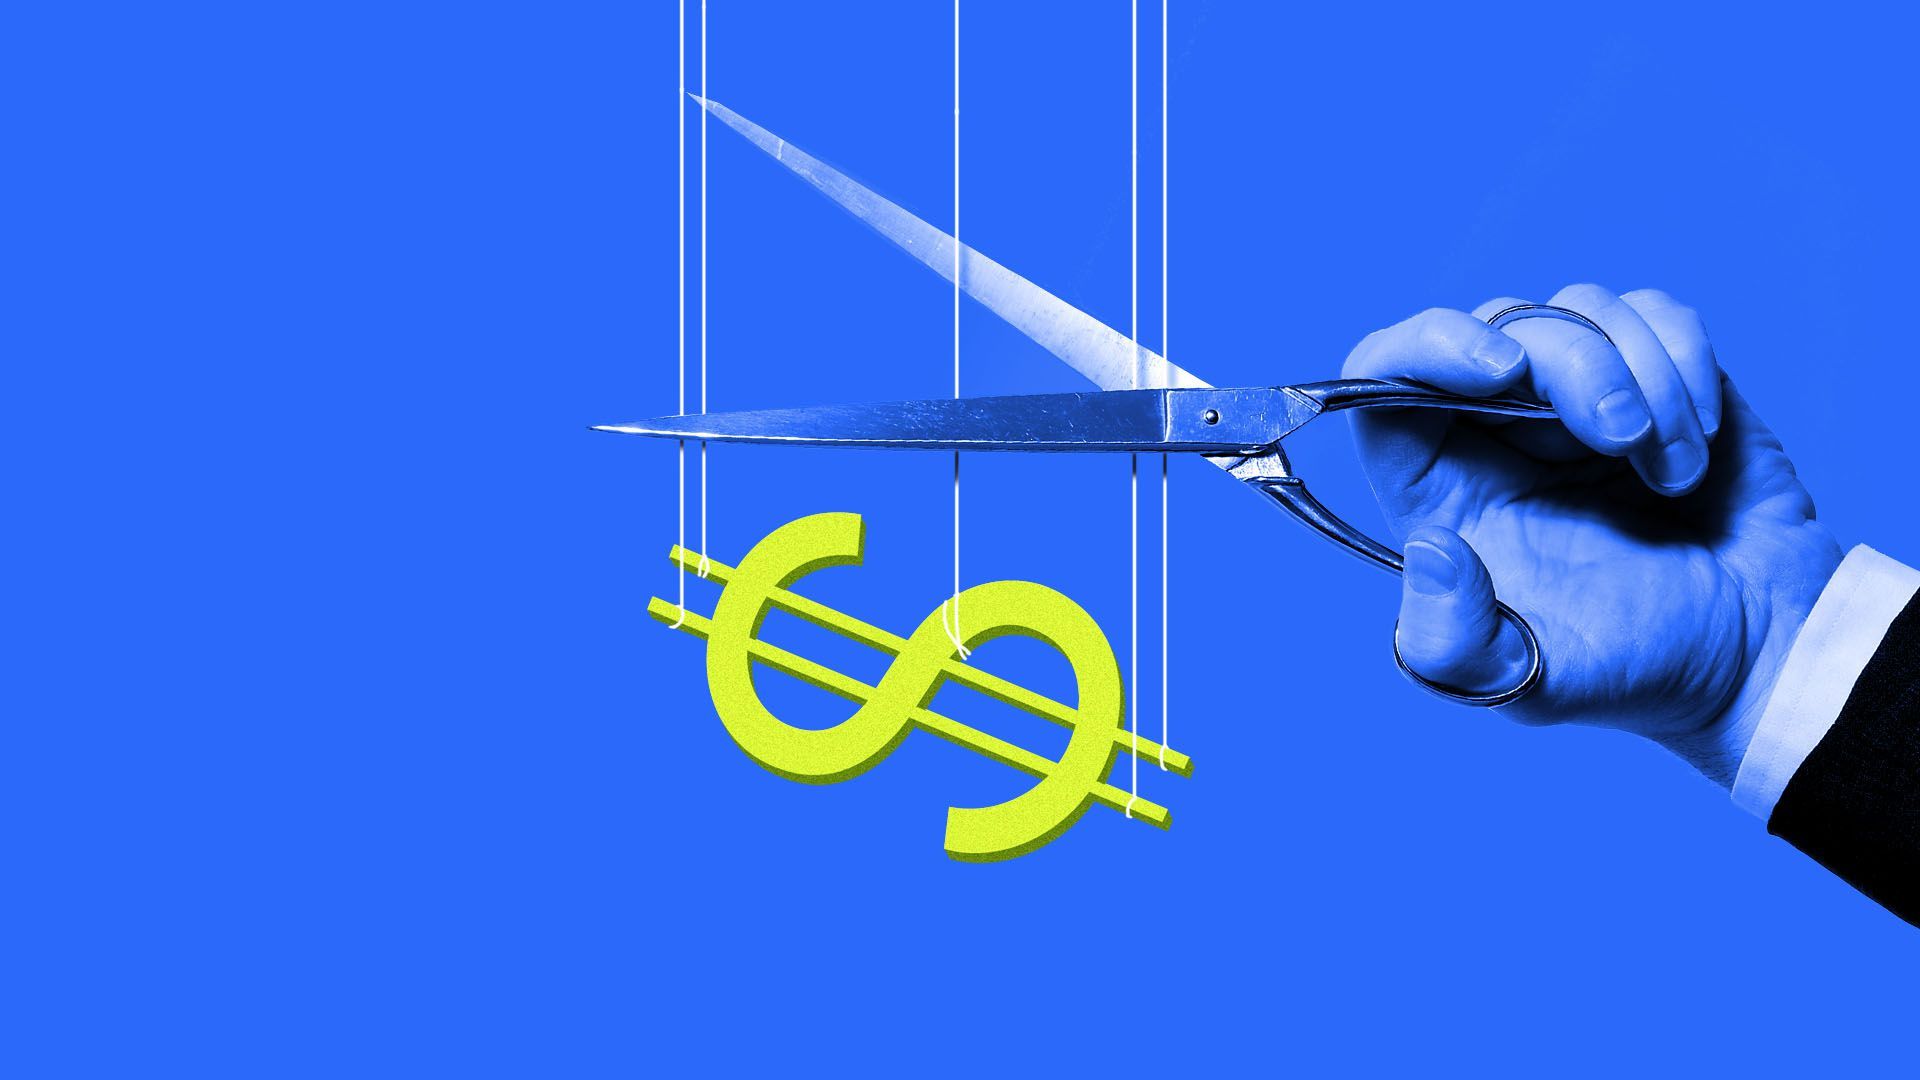 This illustration shows a dollar sign being cut with scissors 